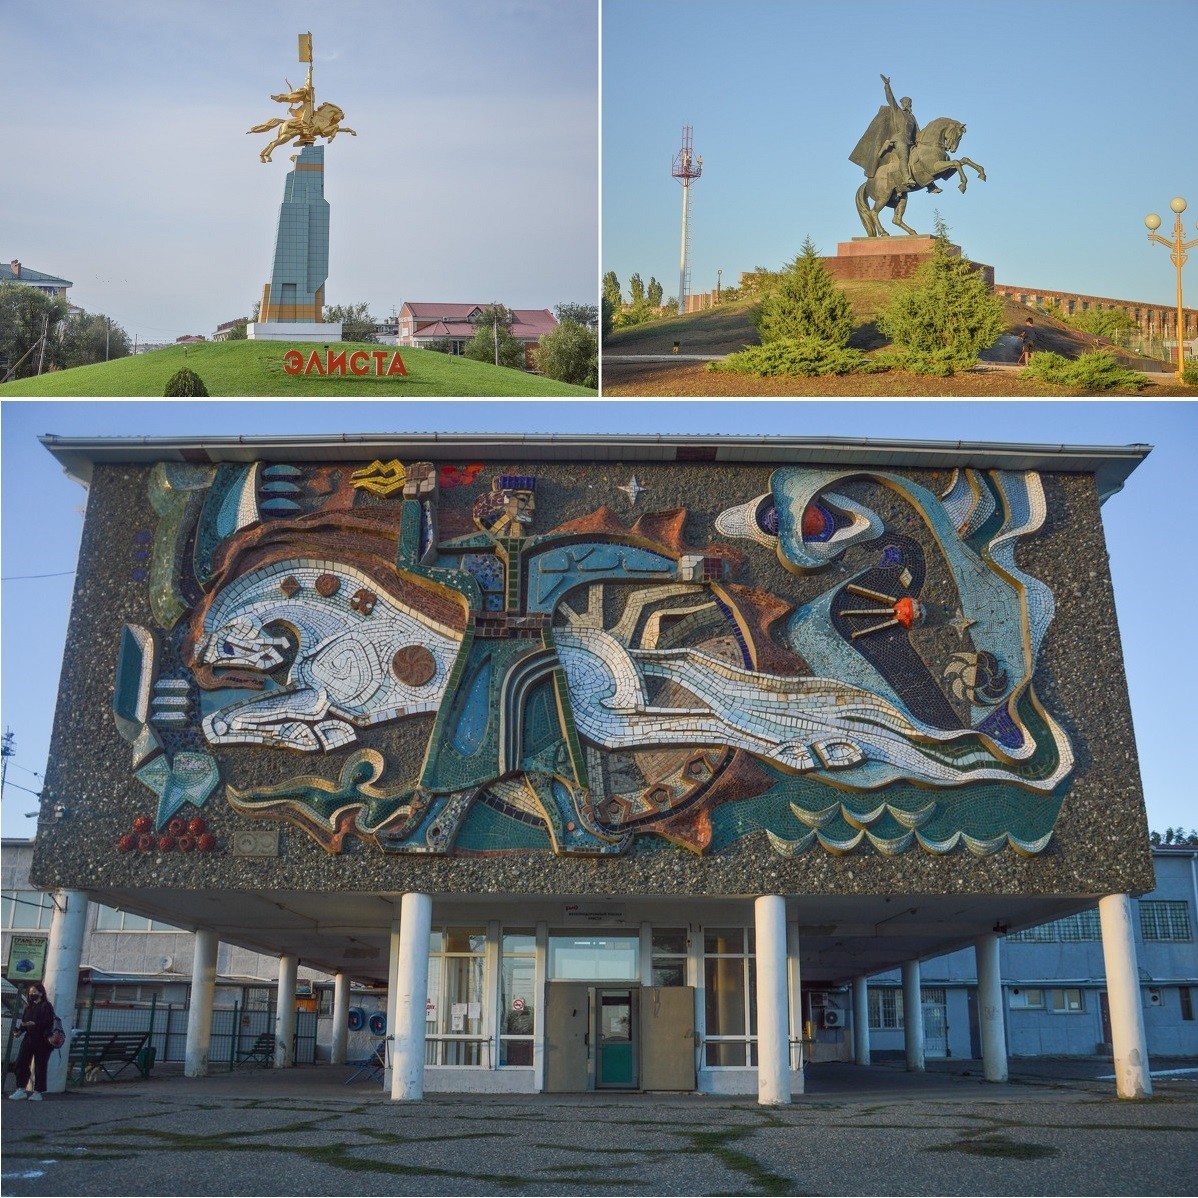 The horse, symbol of nomadism, is omnipresent in Elista, whether in the statues or in a sublime Soviet mosaic on the facade of the station.